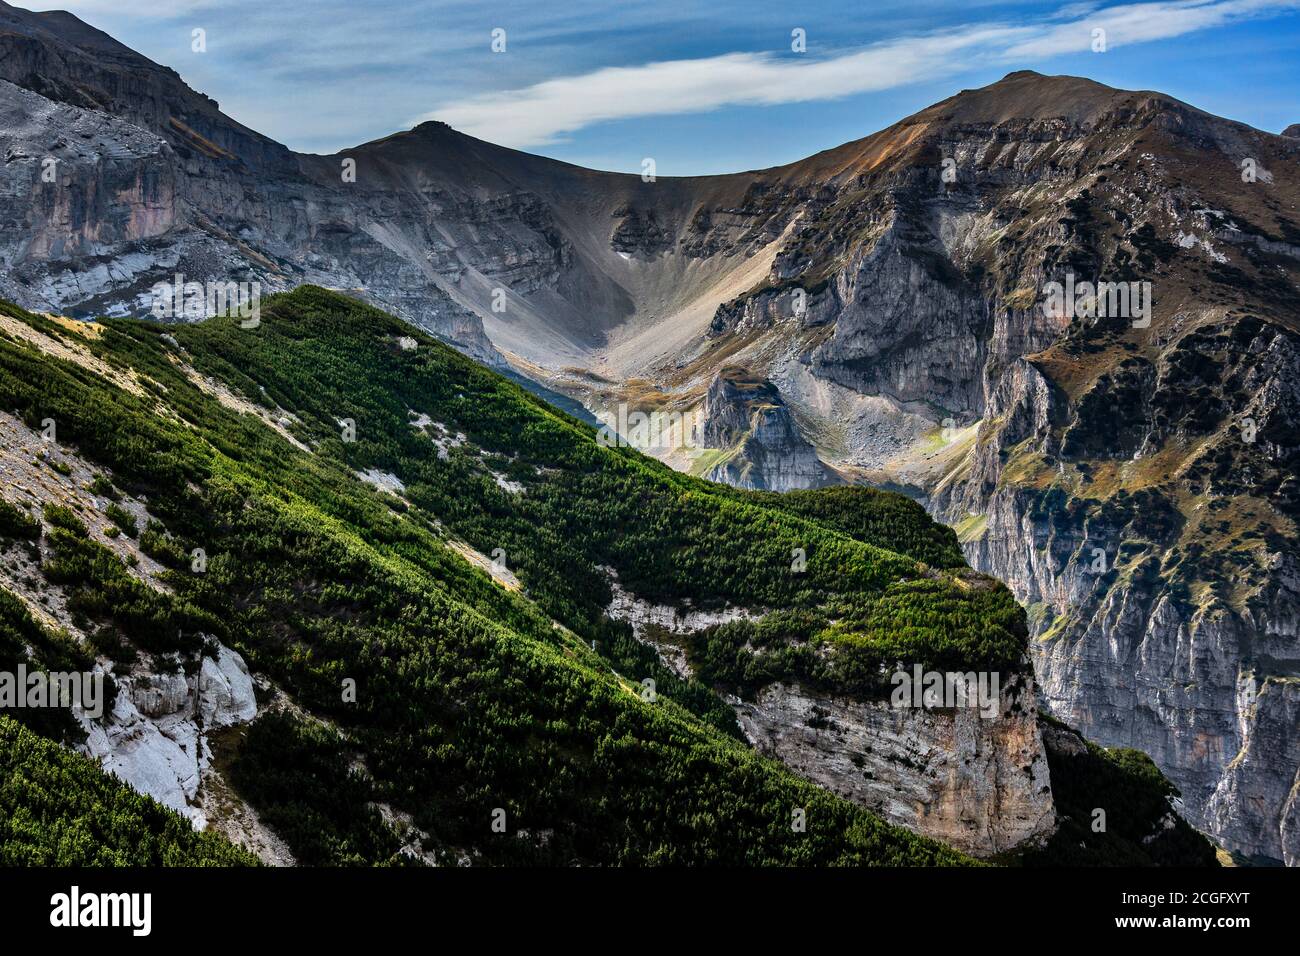 mountain pine woods at the foot of Mount Focalone, Majella National Park. Abruzzo, Italy, Europe Stock Photo